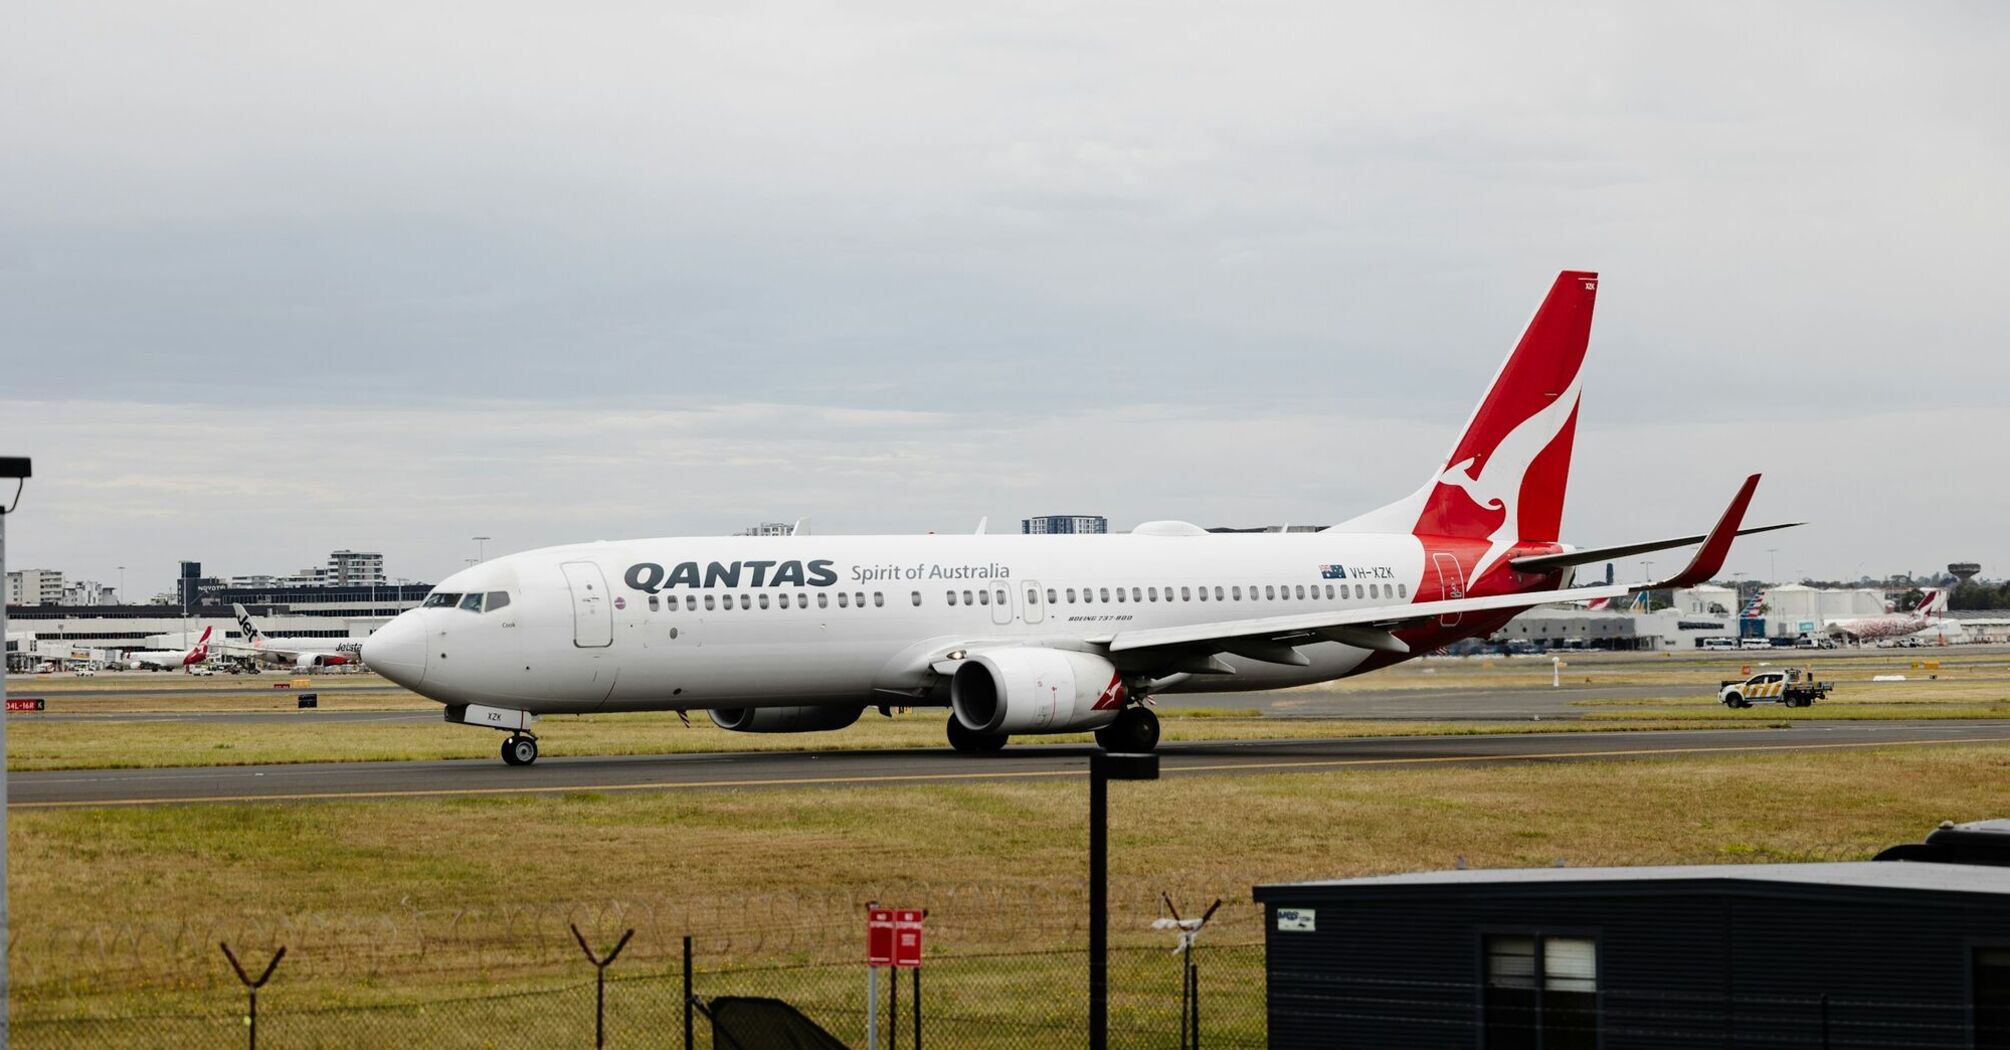 Qantas airplane on the runway with other aircraft in the background